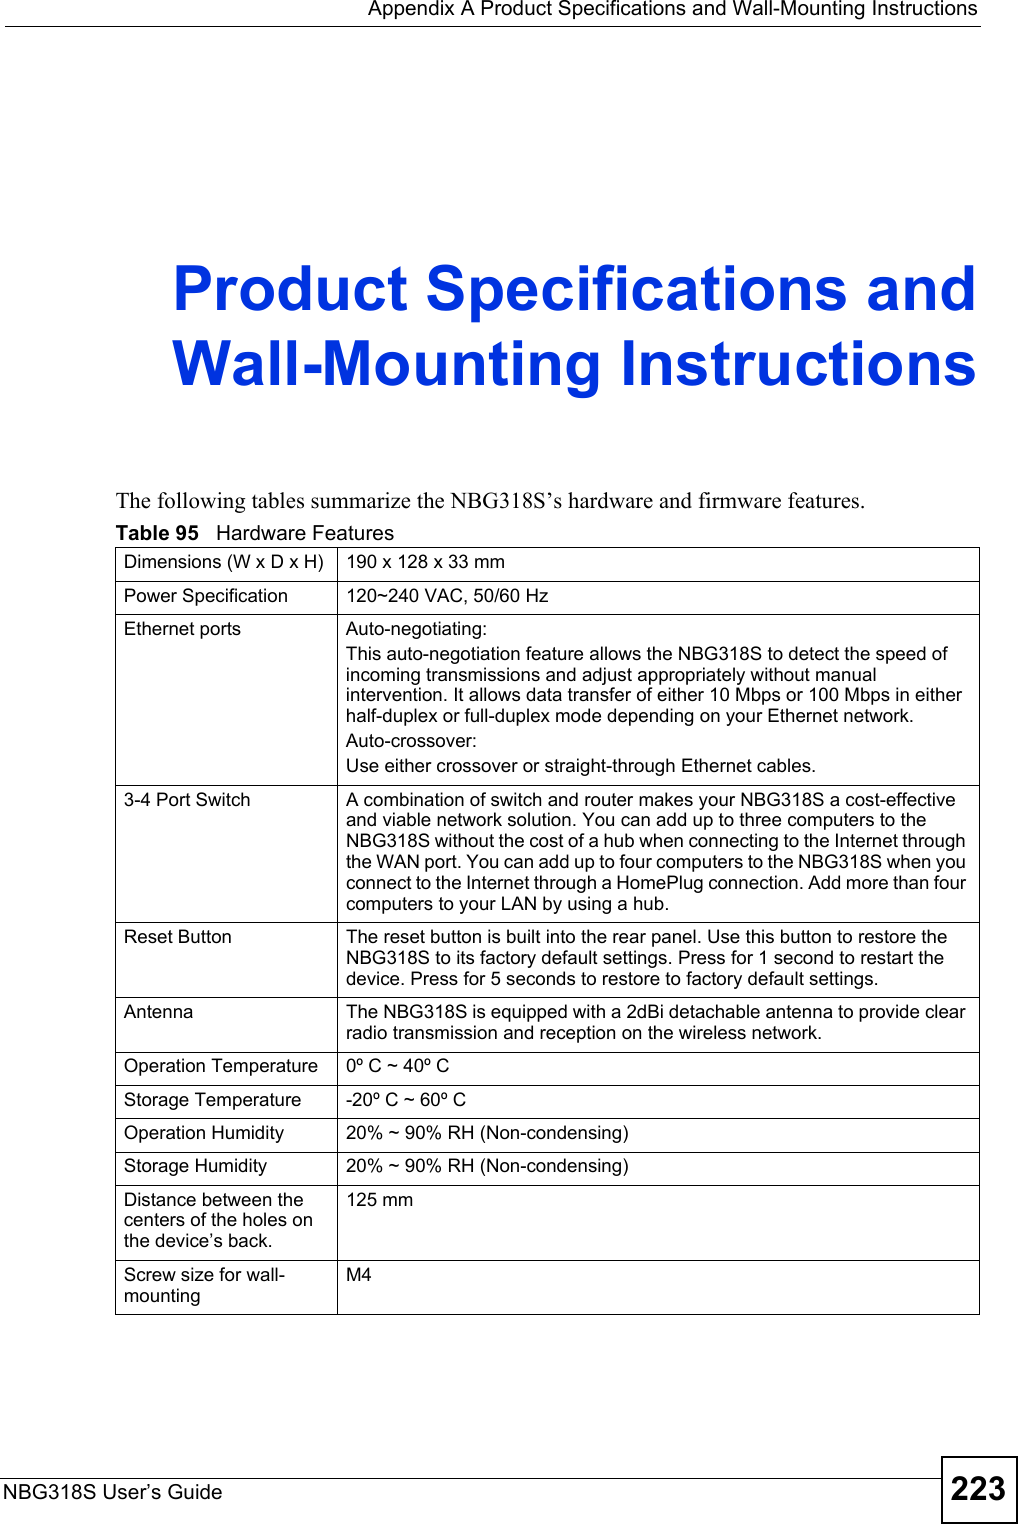  Appendix A Product Specifications and Wall-Mounting InstructionsNBG318S User’s Guide 223APPENDIX  A  Product Specifications andWall-Mounting InstructionsThe following tables summarize the NBG318S’s hardware and firmware features.Table 95   Hardware FeaturesDimensions (W x D x H)  190 x 128 x 33 mmPower Specification 120~240 VAC, 50/60 HzEthernet ports Auto-negotiating: This auto-negotiation feature allows the NBG318S to detect the speed of incoming transmissions and adjust appropriately without manual intervention. It allows data transfer of either 10 Mbps or 100 Mbps in either half-duplex or full-duplex mode depending on your Ethernet network.Auto-crossover: Use either crossover or straight-through Ethernet cables.3-4 Port Switch A combination of switch and router makes your NBG318S a cost-effective and viable network solution. You can add up to three computers to the NBG318S without the cost of a hub when connecting to the Internet through the WAN port. You can add up to four computers to the NBG318S when you connect to the Internet through a HomePlug connection. Add more than four computers to your LAN by using a hub.Reset Button The reset button is built into the rear panel. Use this button to restore the NBG318S to its factory default settings. Press for 1 second to restart the device. Press for 5 seconds to restore to factory default settings.Antenna The NBG318S is equipped with a 2dBi detachable antenna to provide clear radio transmission and reception on the wireless network. Operation Temperature 0º C ~ 40º CStorage Temperature -20º C ~ 60º COperation Humidity 20% ~ 90% RH (Non-condensing)Storage Humidity 20% ~ 90% RH (Non-condensing)Distance between the centers of the holes on the device’s back.125 mmScrew size for wall-mountingM4